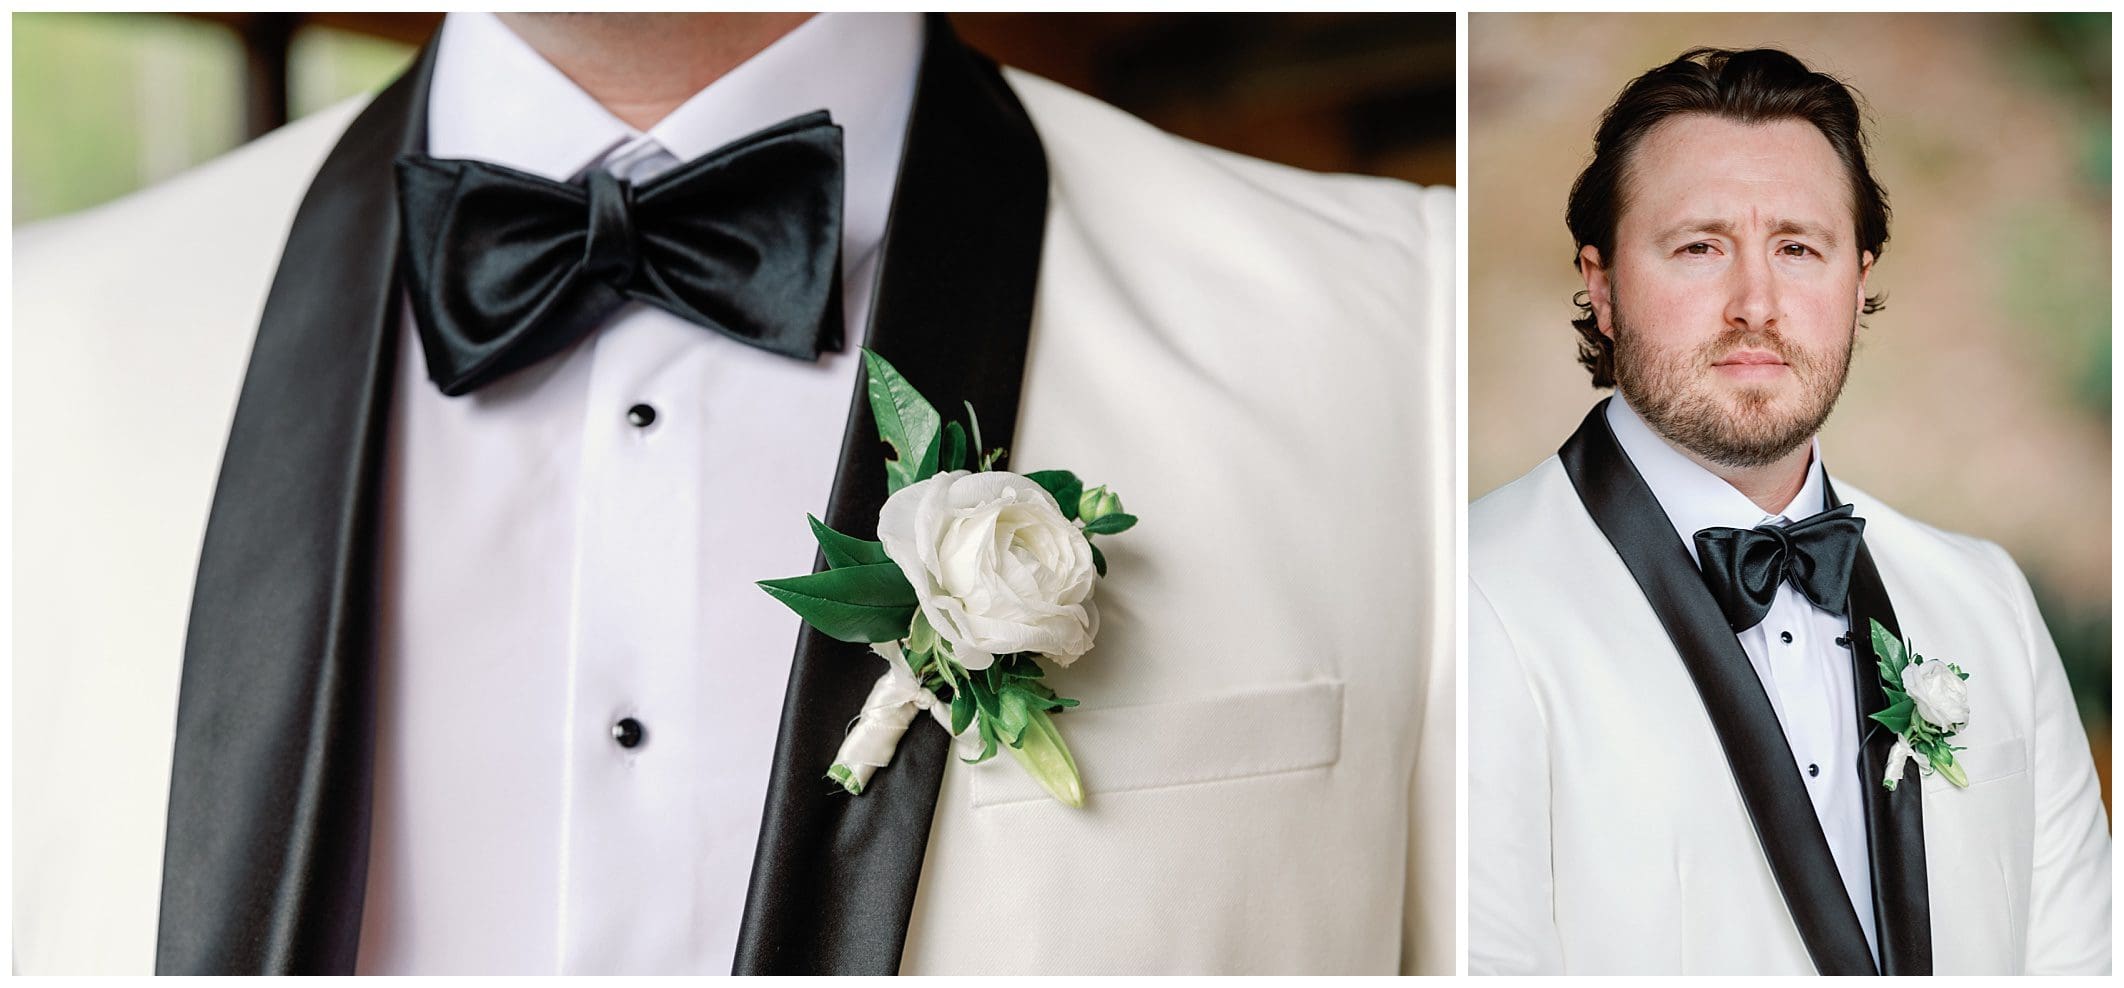 Close-up of a man in a tuxedo with a black bow tie and white rose boutonniere, alongside a portrait of the same man staring thoughtfully.